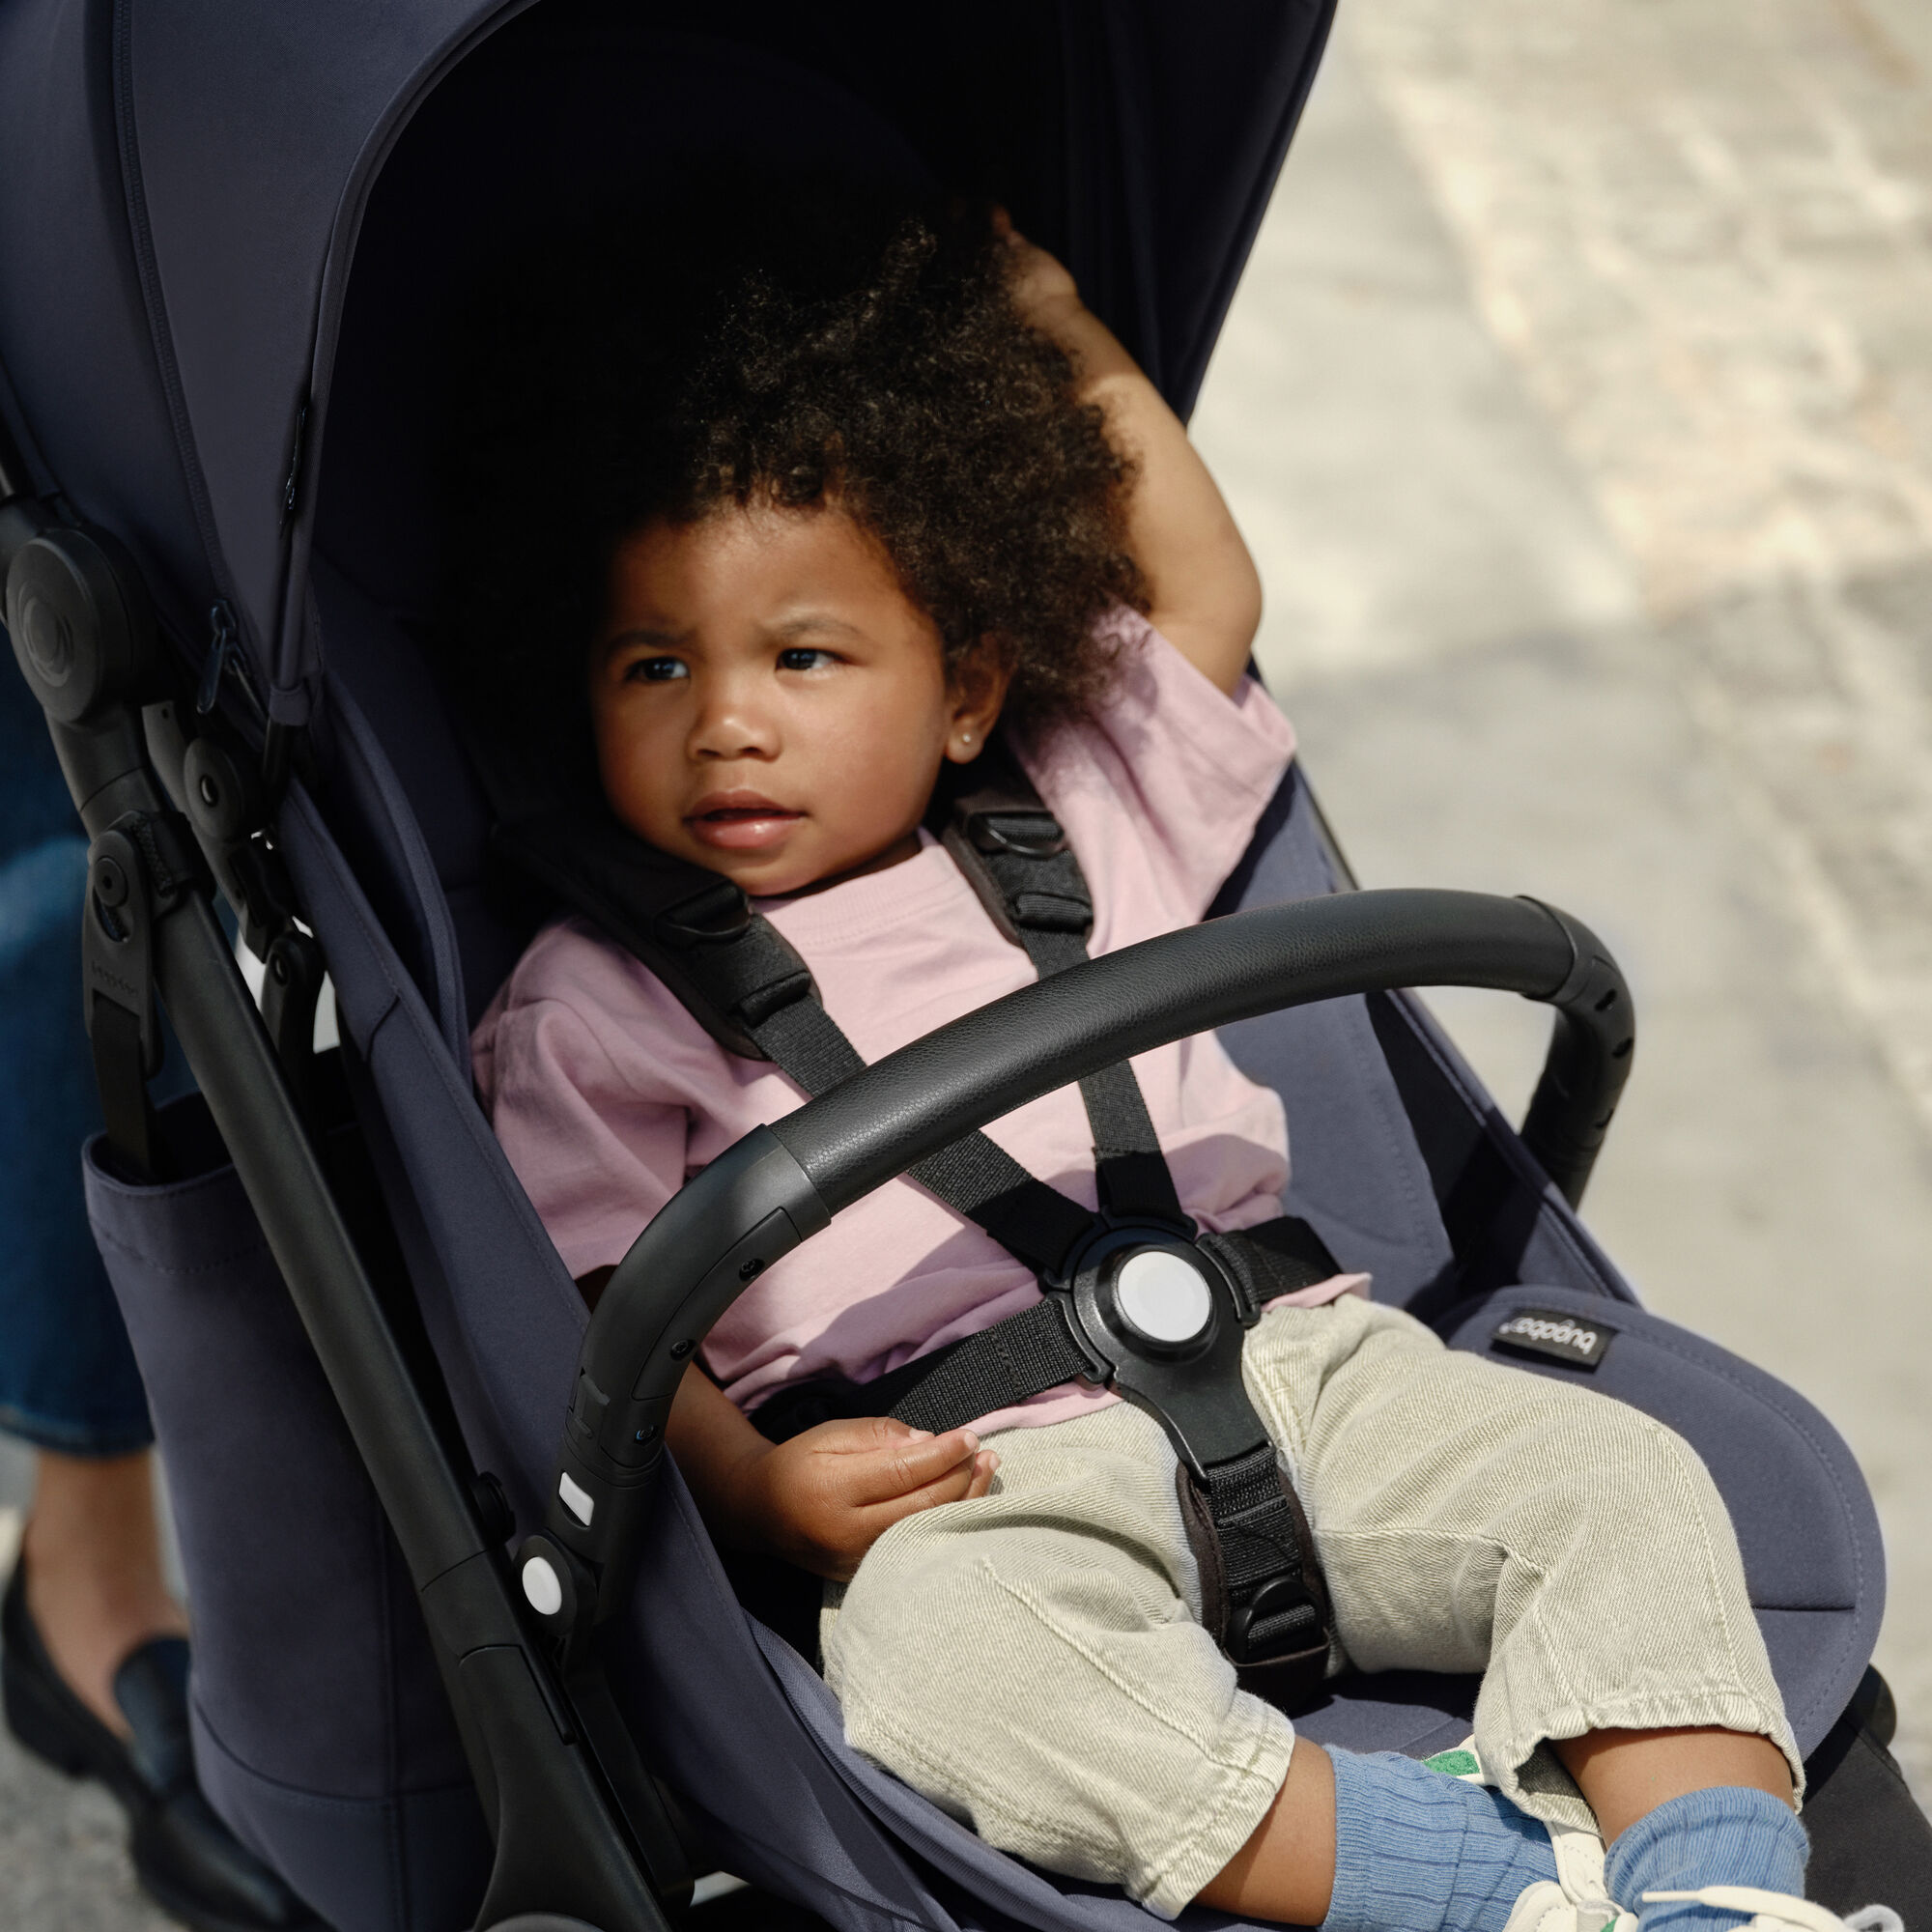 A toddler relaxes in the seat of an ultra-compact Bugaboo Butterfly travel stroller. The toddler is securely seated with the harness fastened and a Bugaboo Butterfly bumper bar across their middle. 